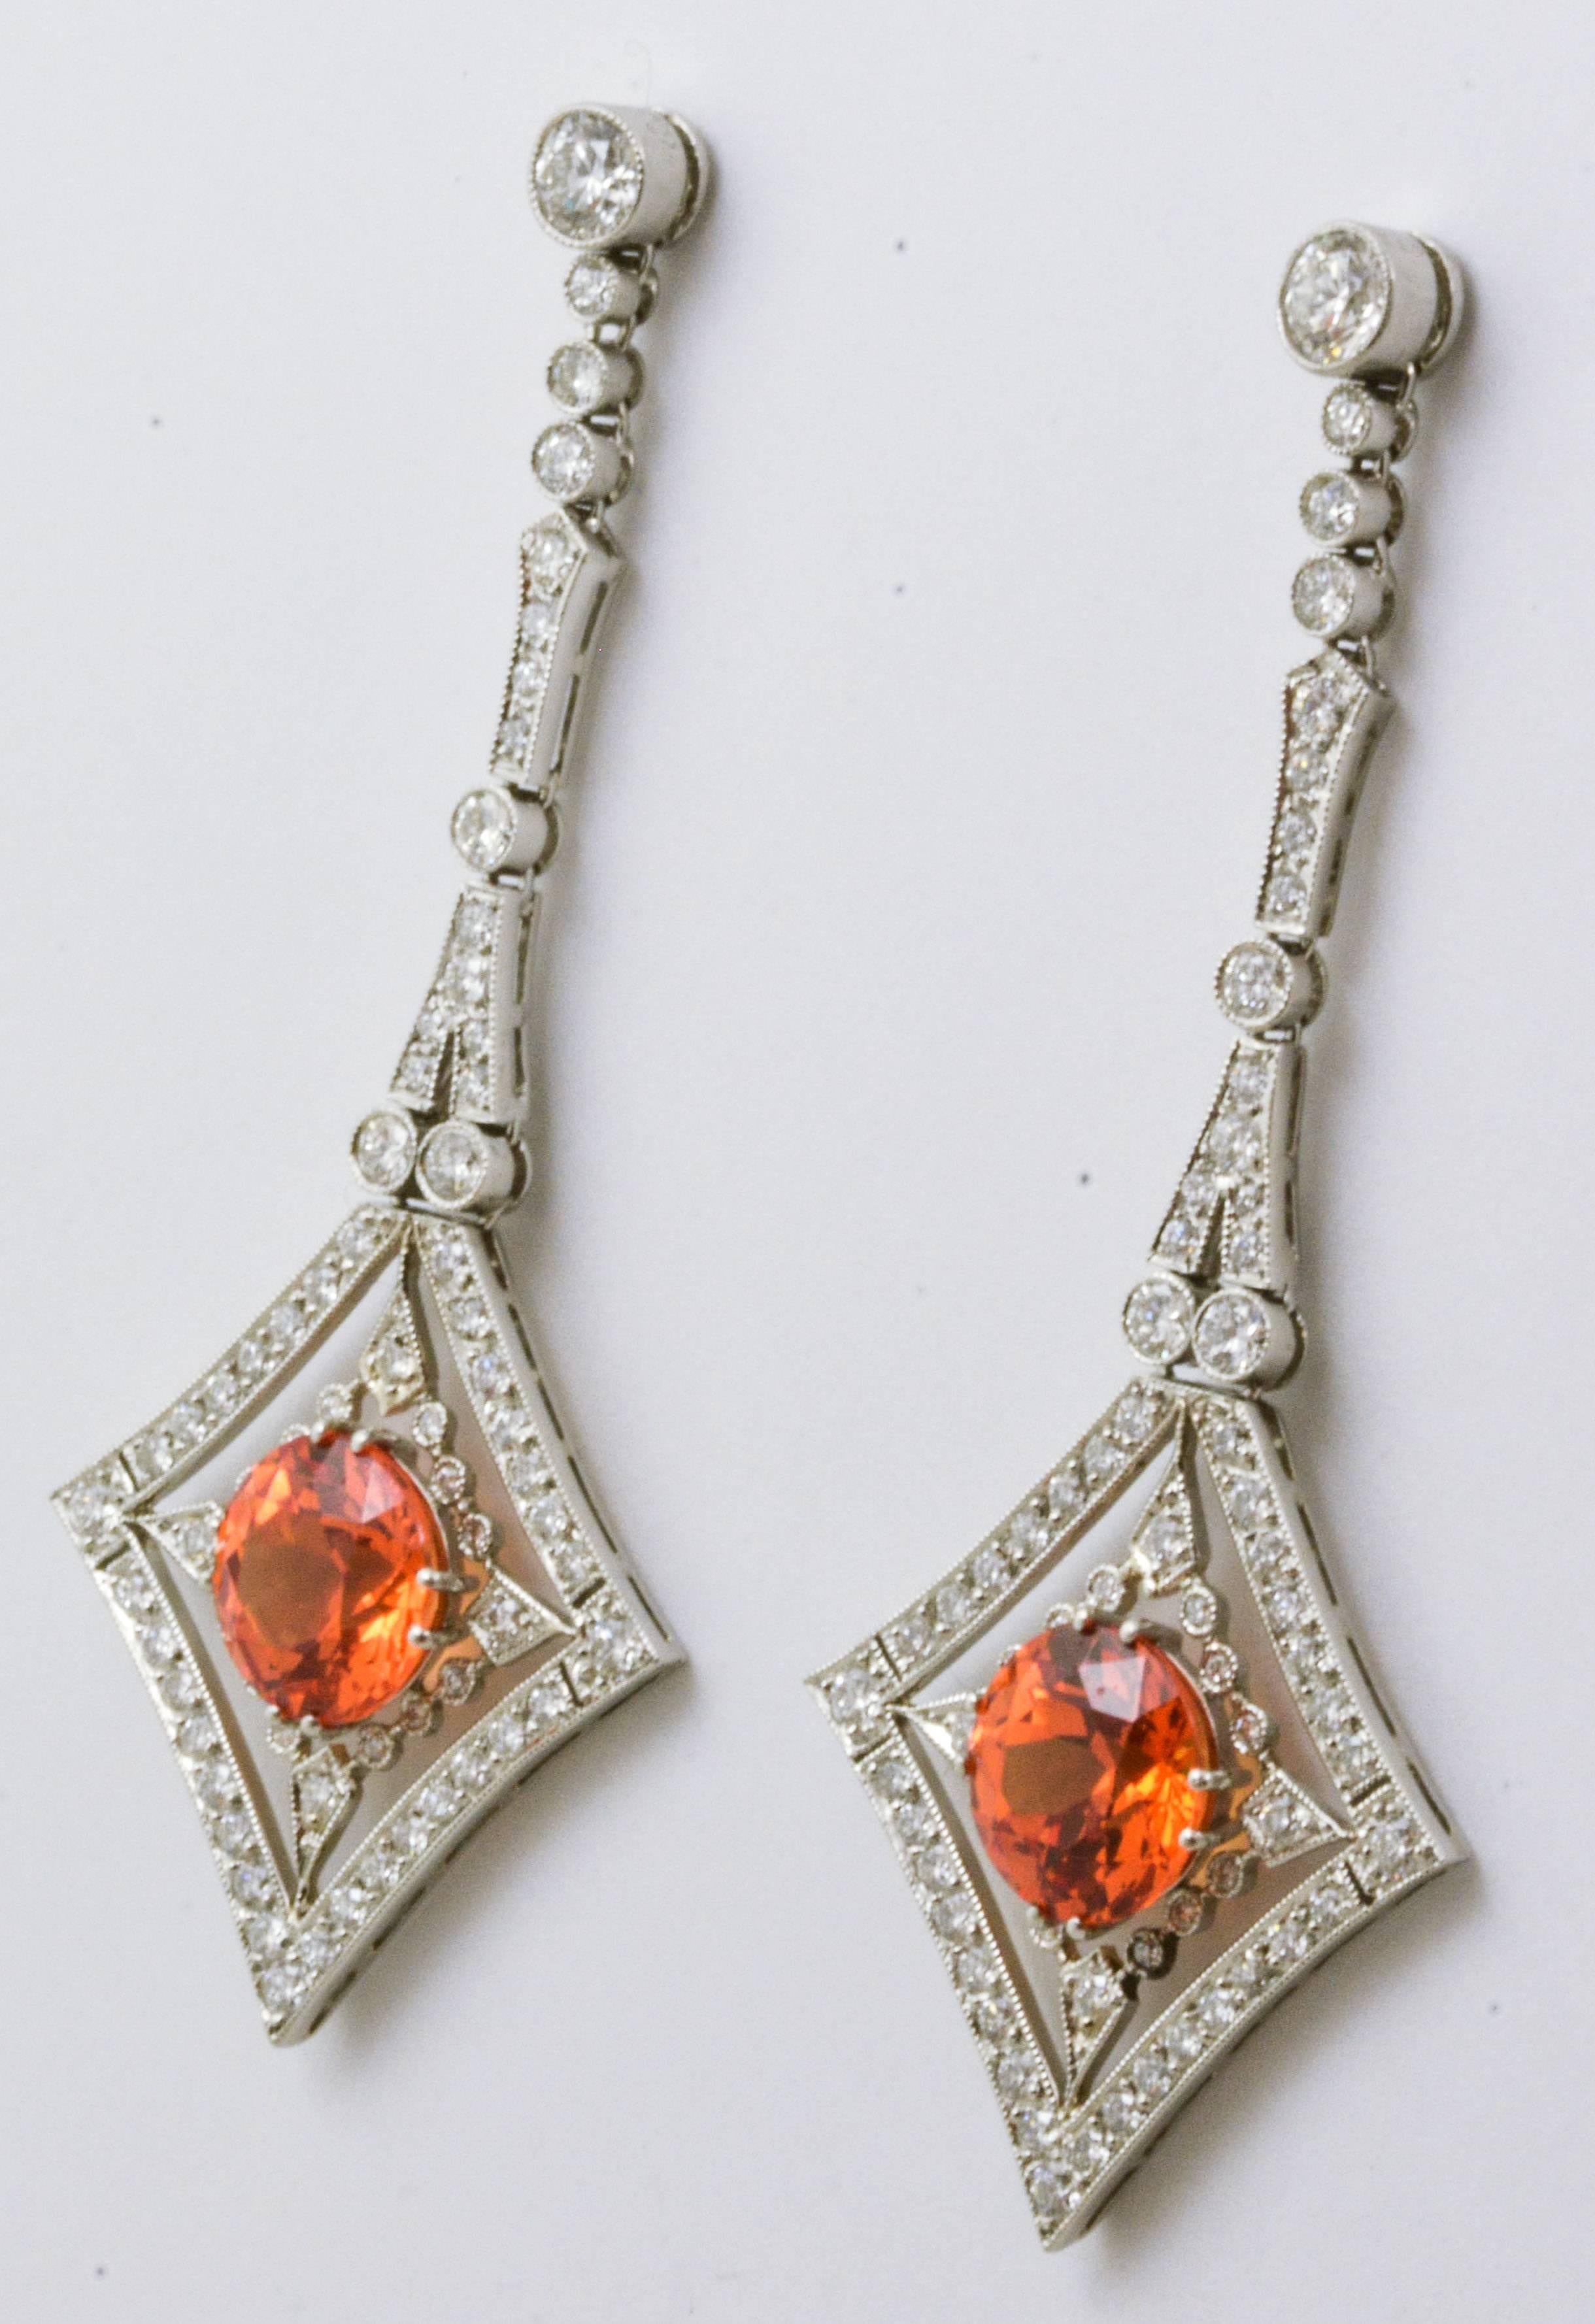 Wrapped in a fascinating combination of shimmering diamonds and platinum, are a pair of  round, custom, brilliant cut Mandarin Garnets (2.72 carats). She will look absolutely stunning and exquisitely dressed in these platinum drop earrings. They are